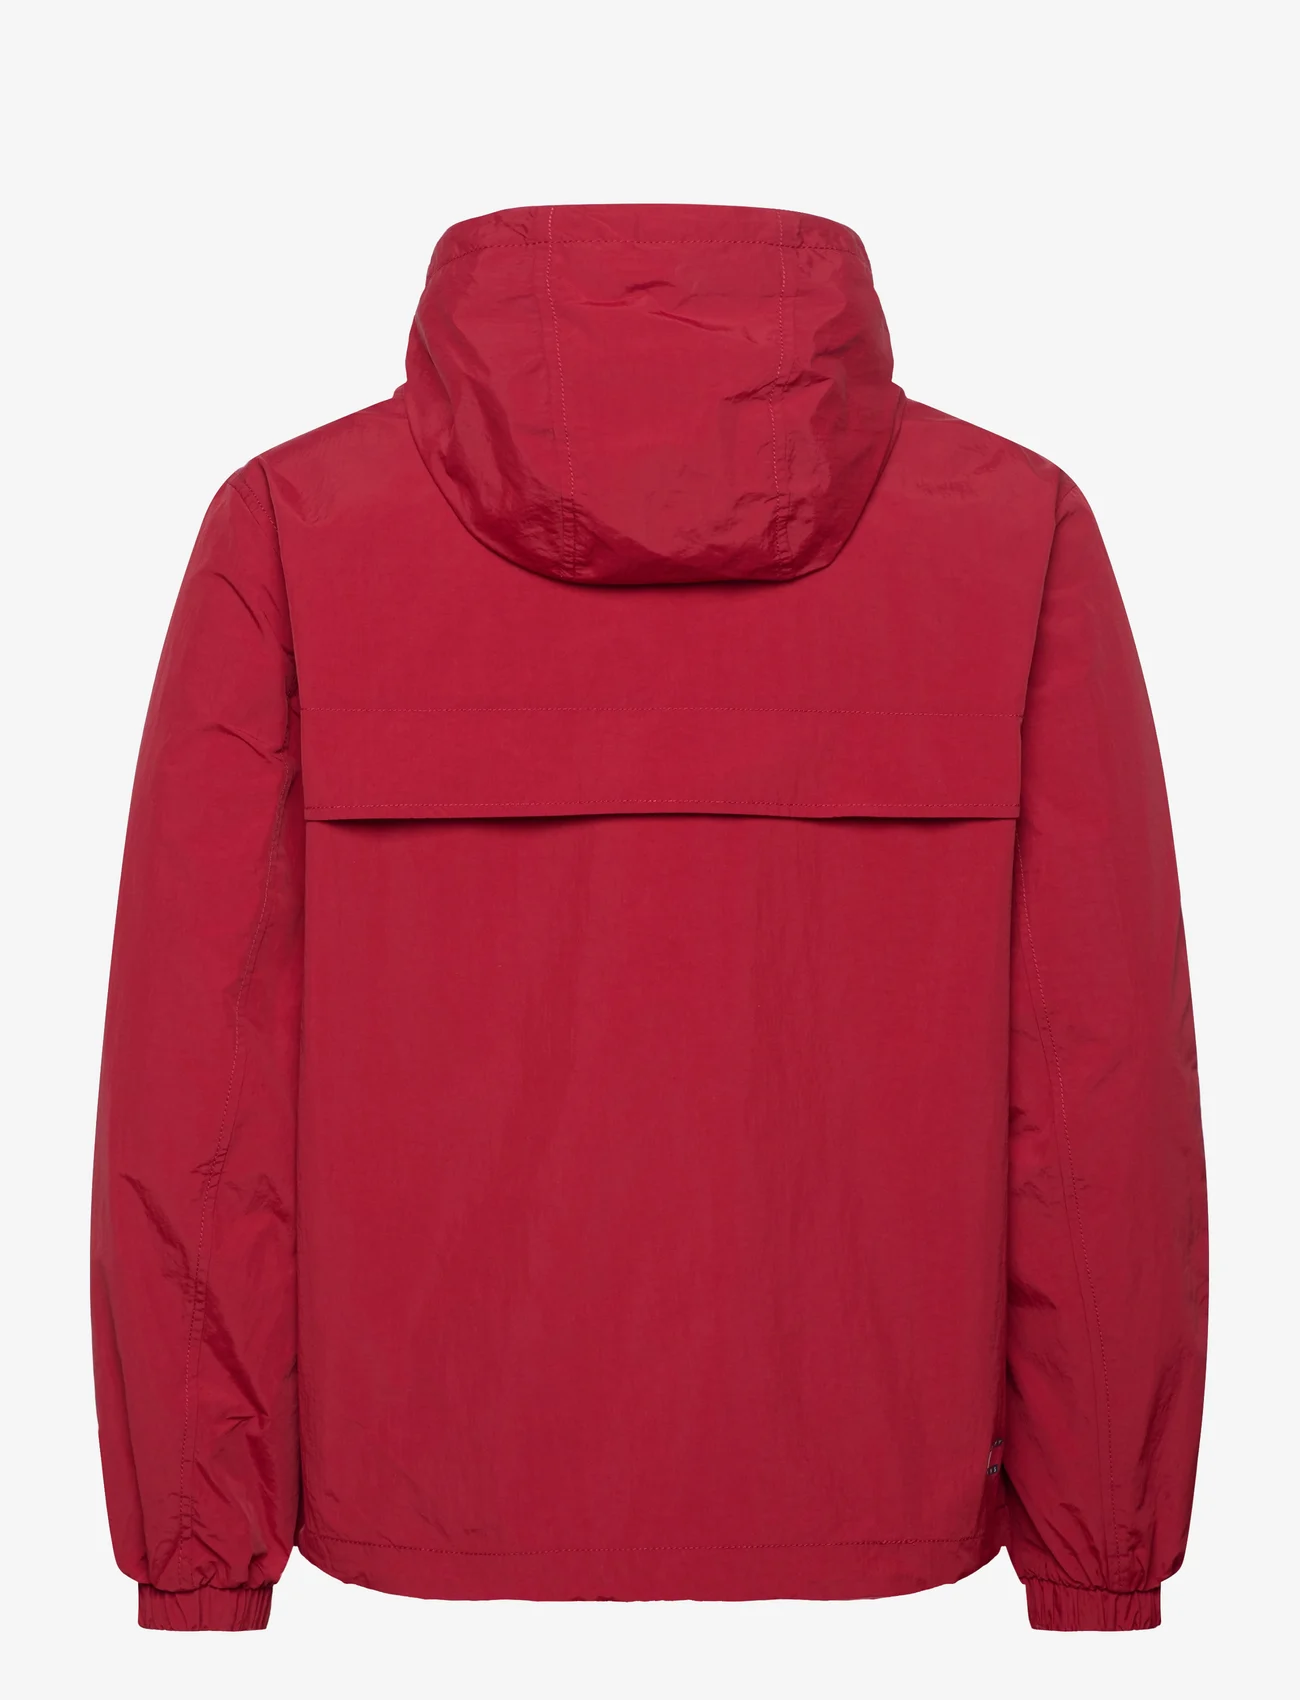 Tommy Jeans - TJM CHICAGO WINDBREAKER EXT - spring jackets - magma red - 1